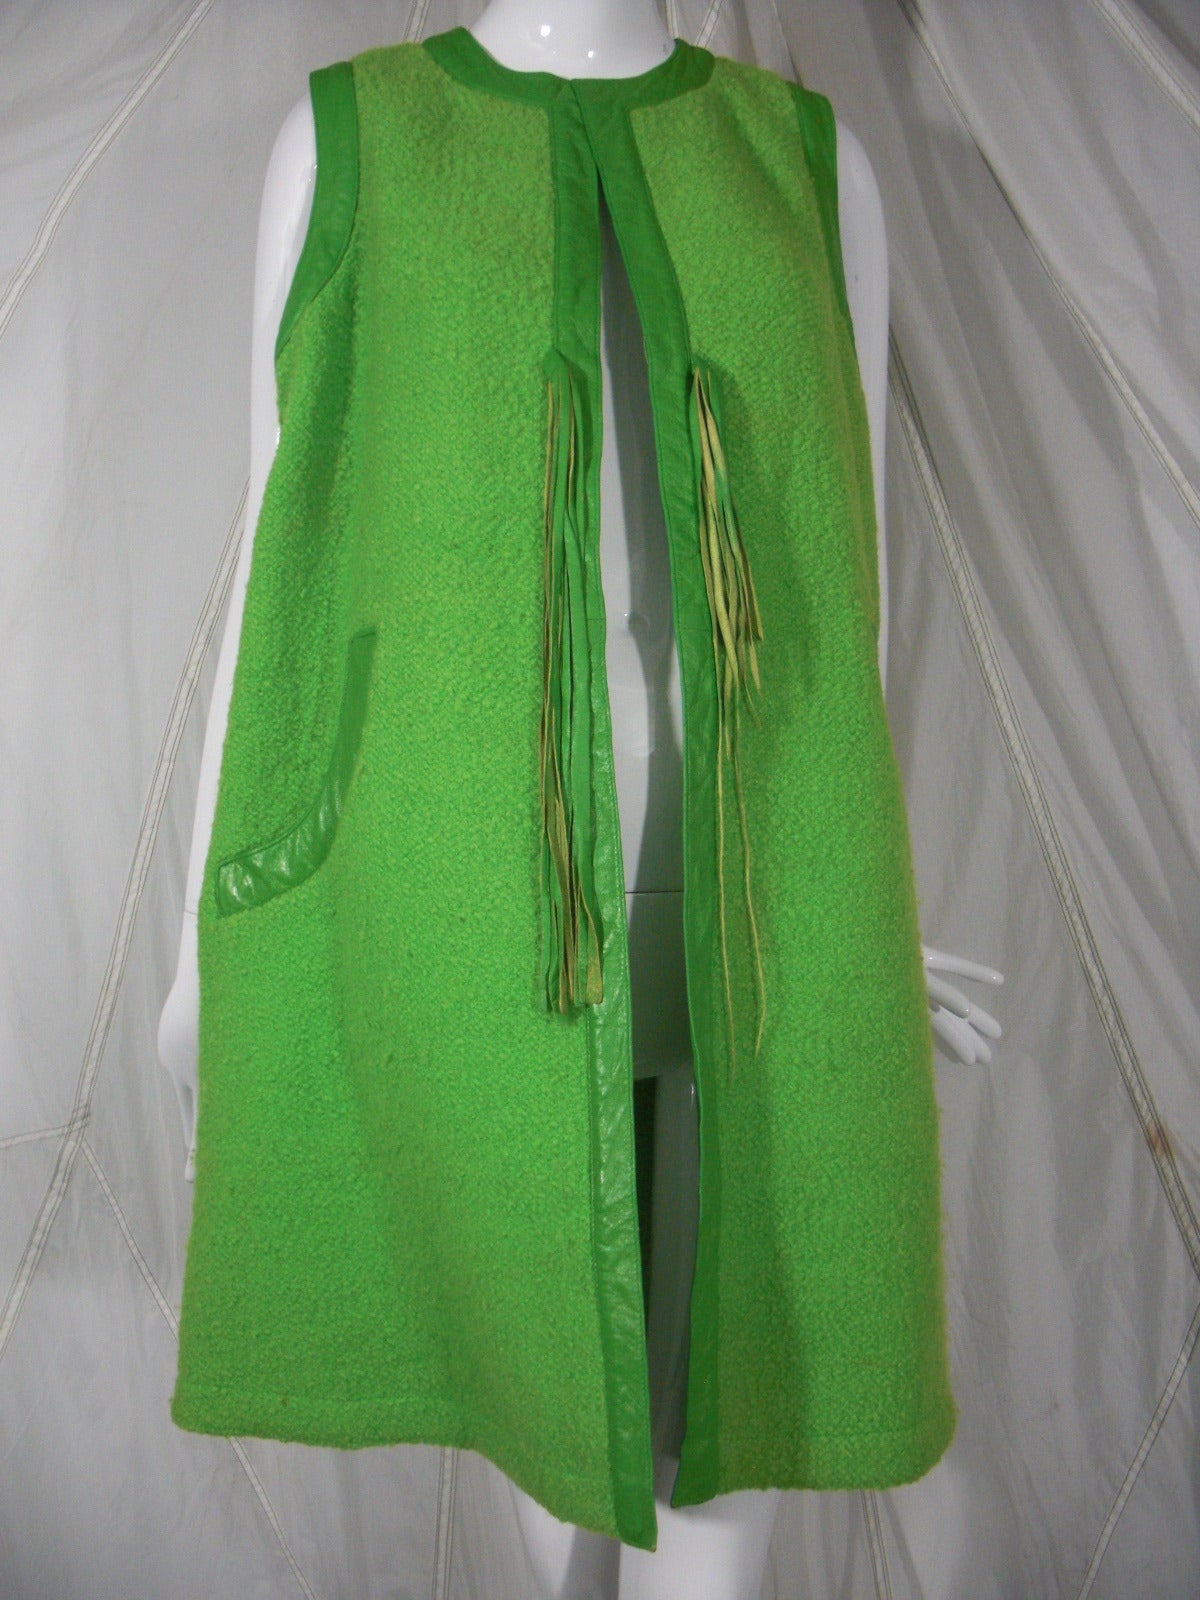 1960s Bonnie Cashin Apple Green Wool and Leather Trimmed Vest 5